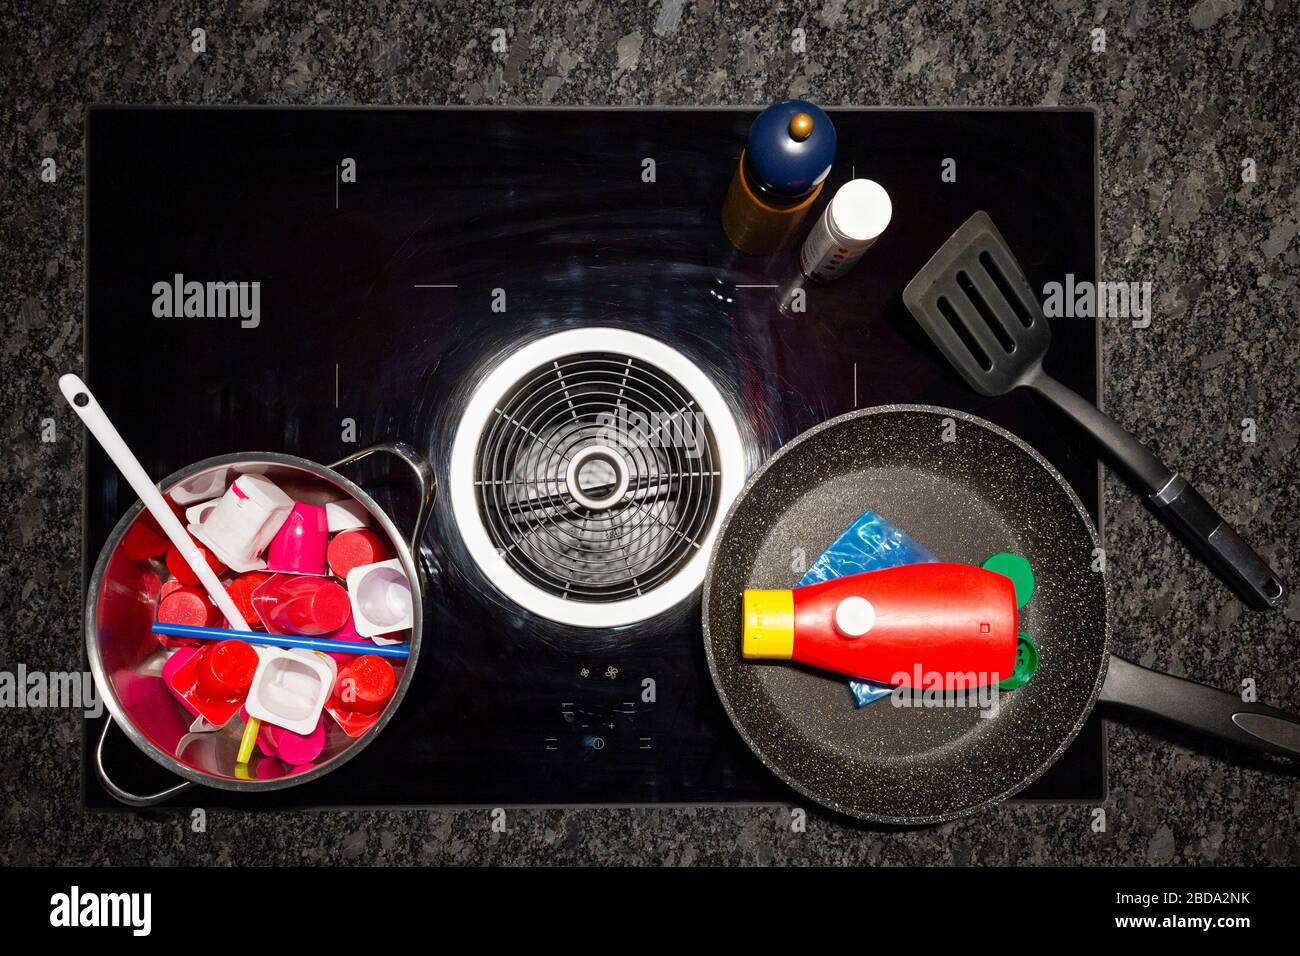 Concept of food pollution with plastic waste. Top view of a stove with a frying and a cooking pan filled with plastic objects representing food. Stock Photo